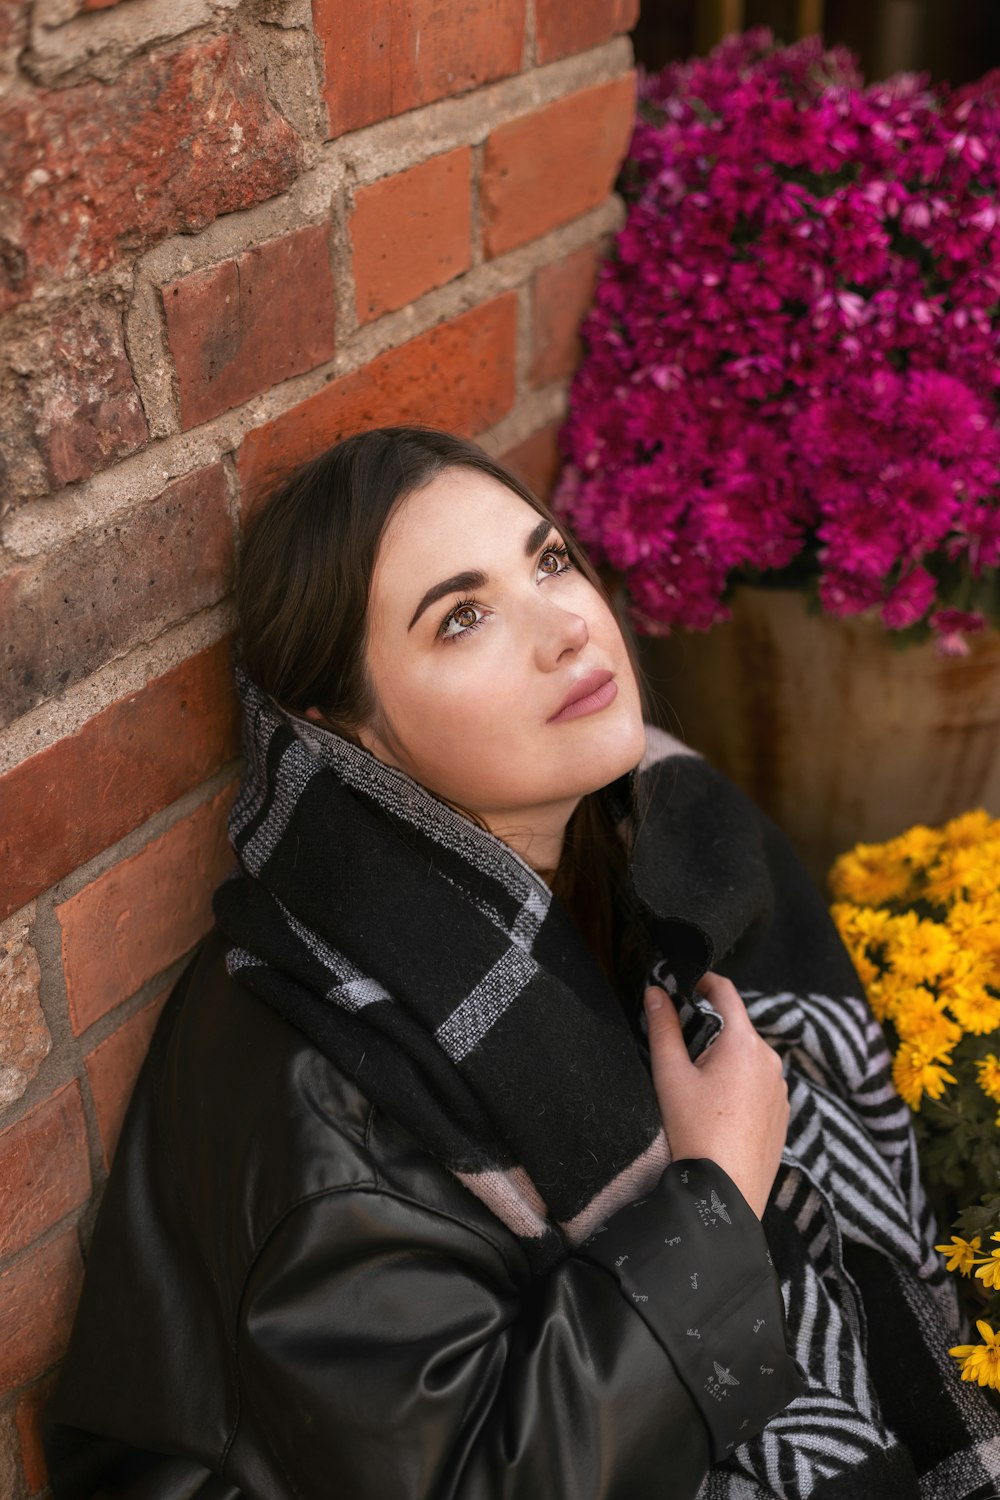 a woman leaning against a brick wall next to flowers